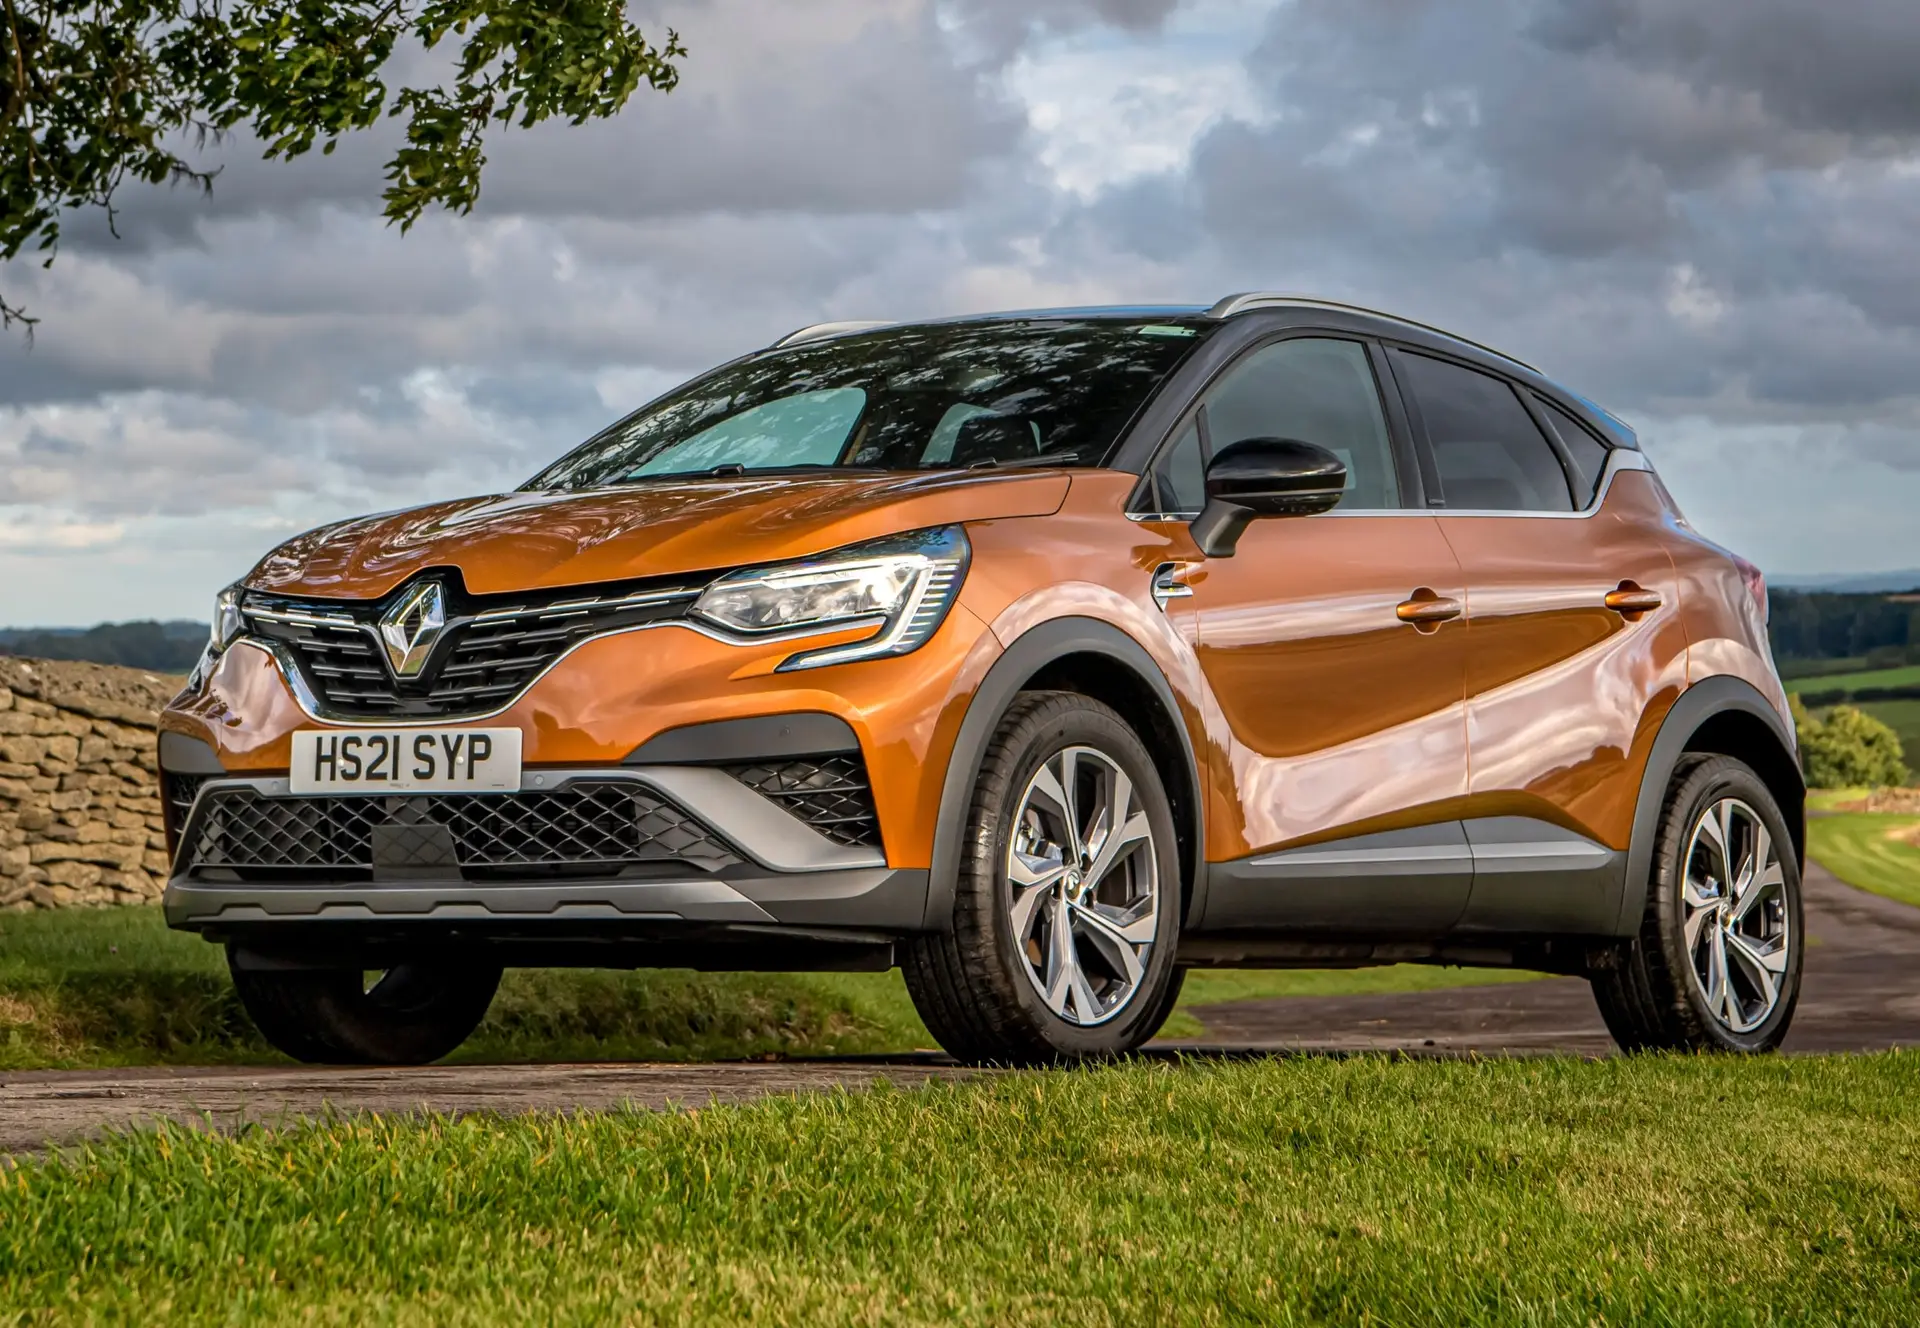 The new Renault Captur will look to maintain the top spot - JATO